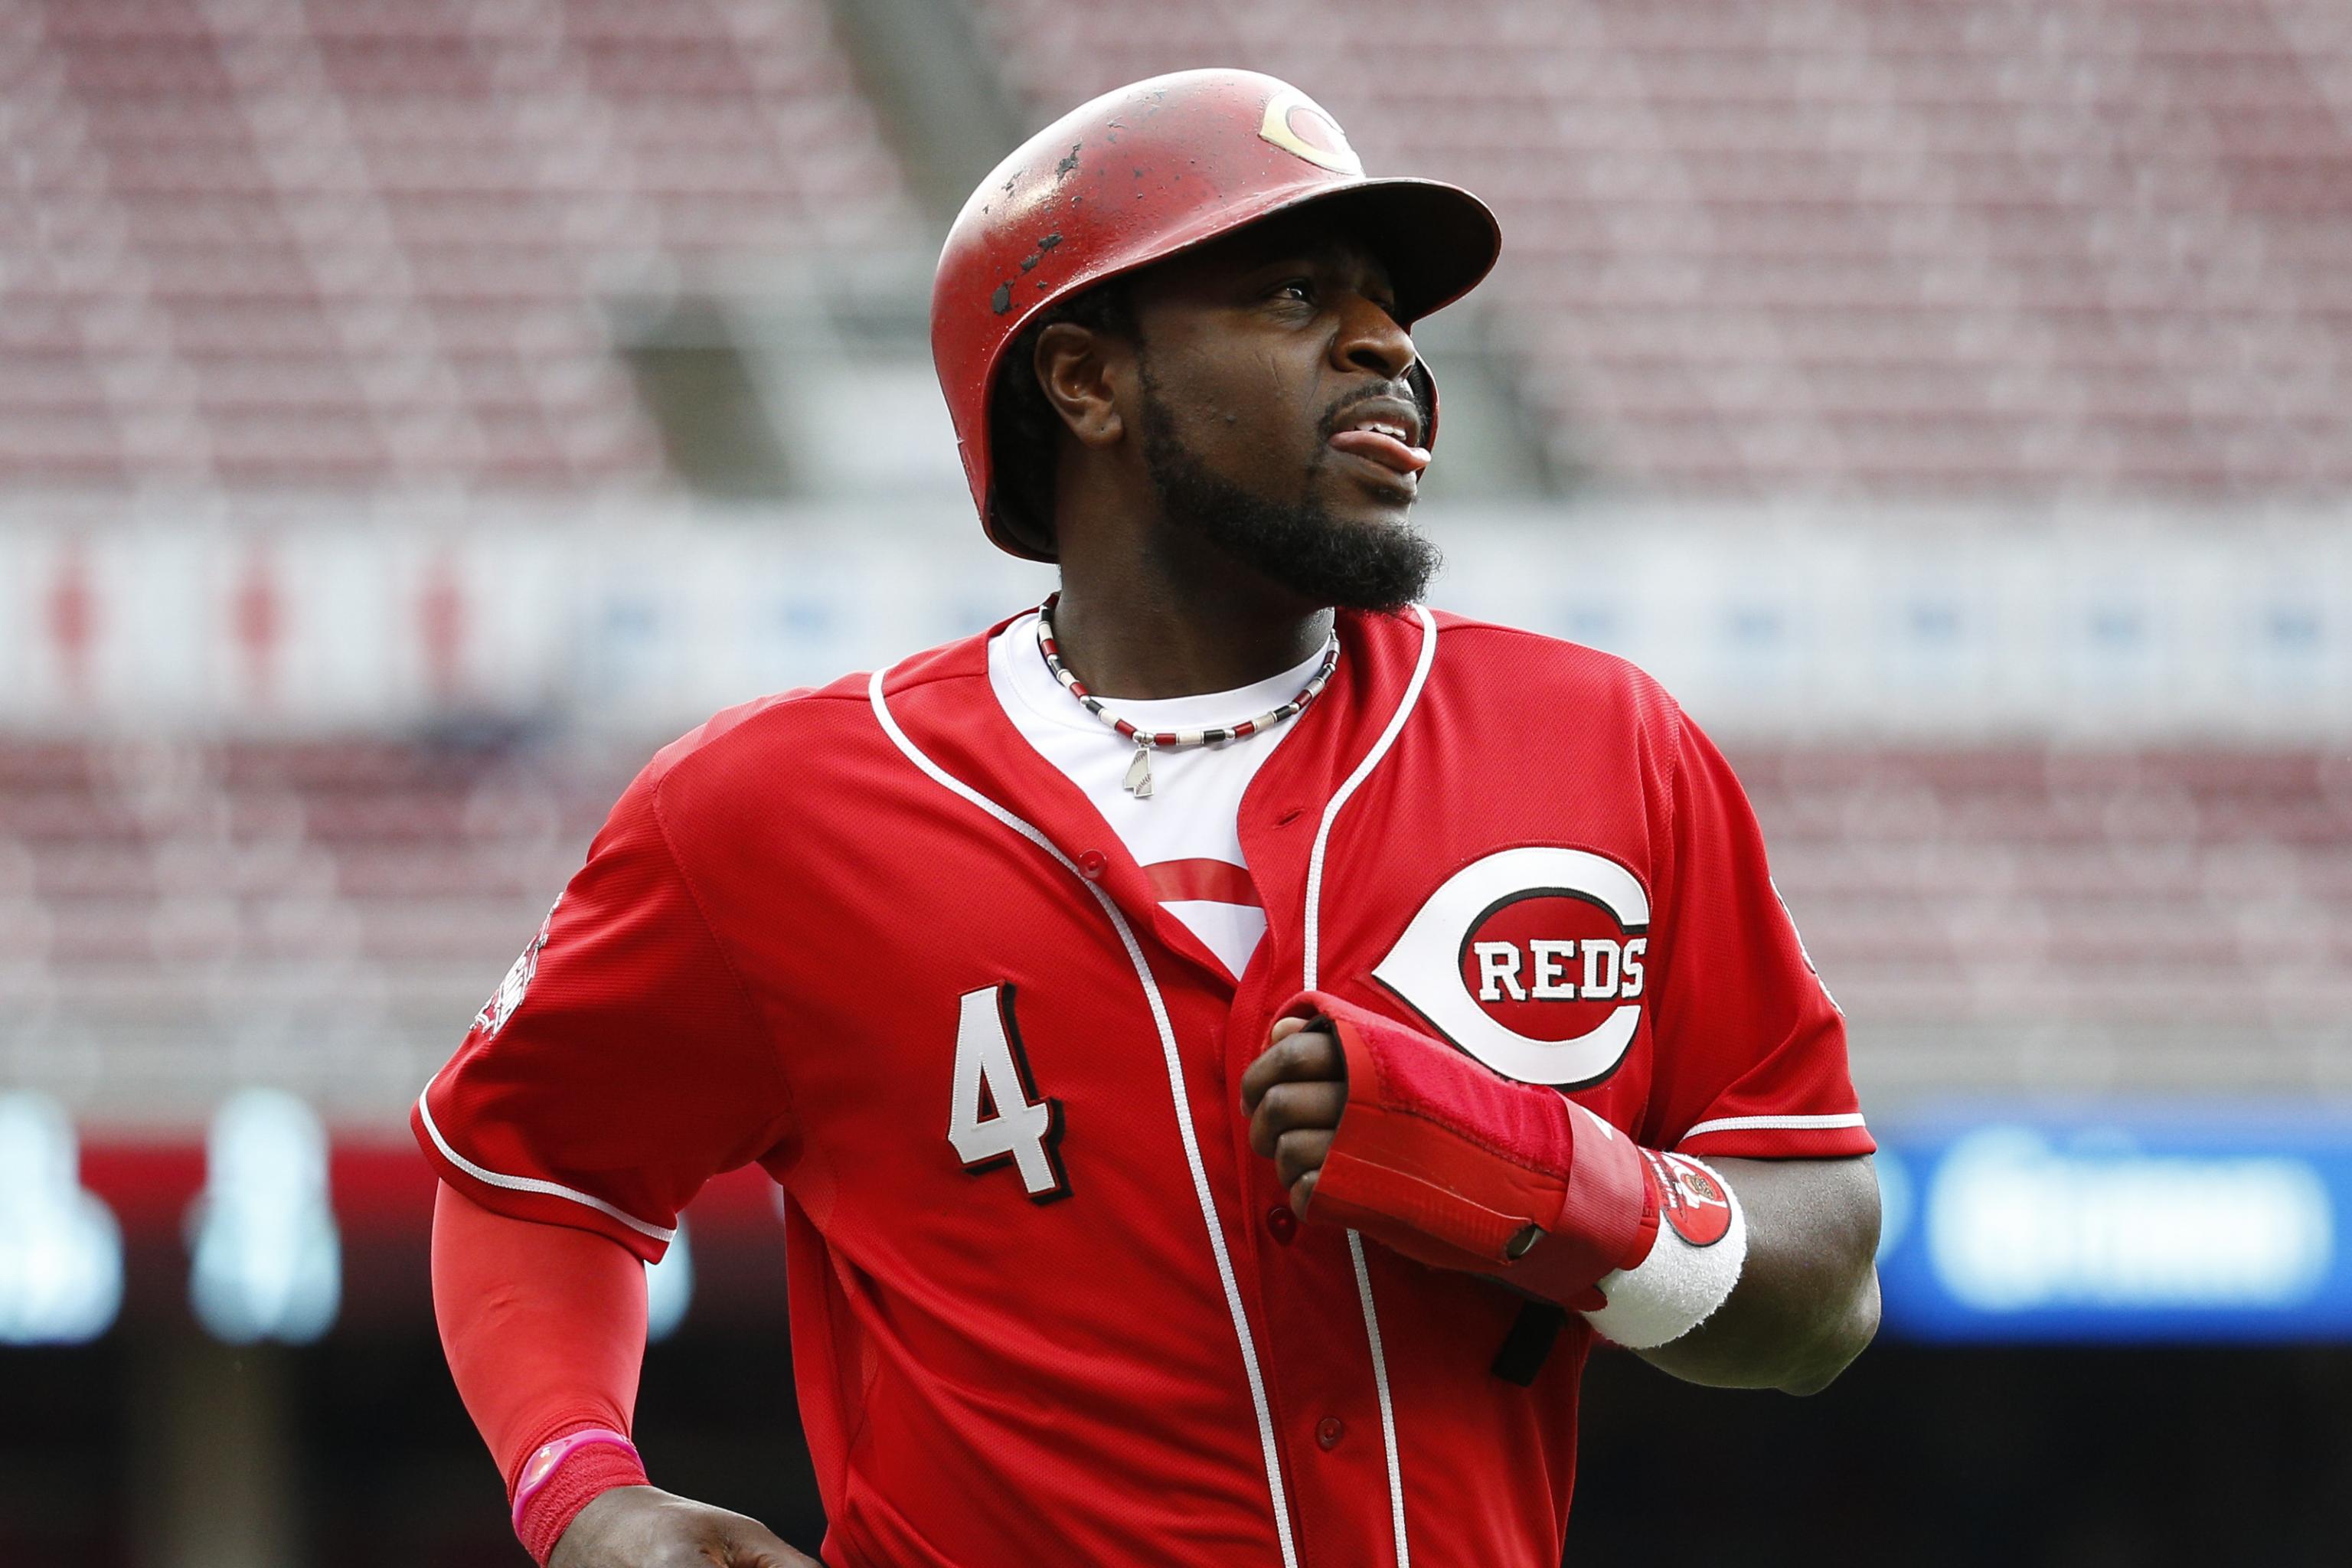 Brandon Phillips tweets about possibility of crashing Redsfest